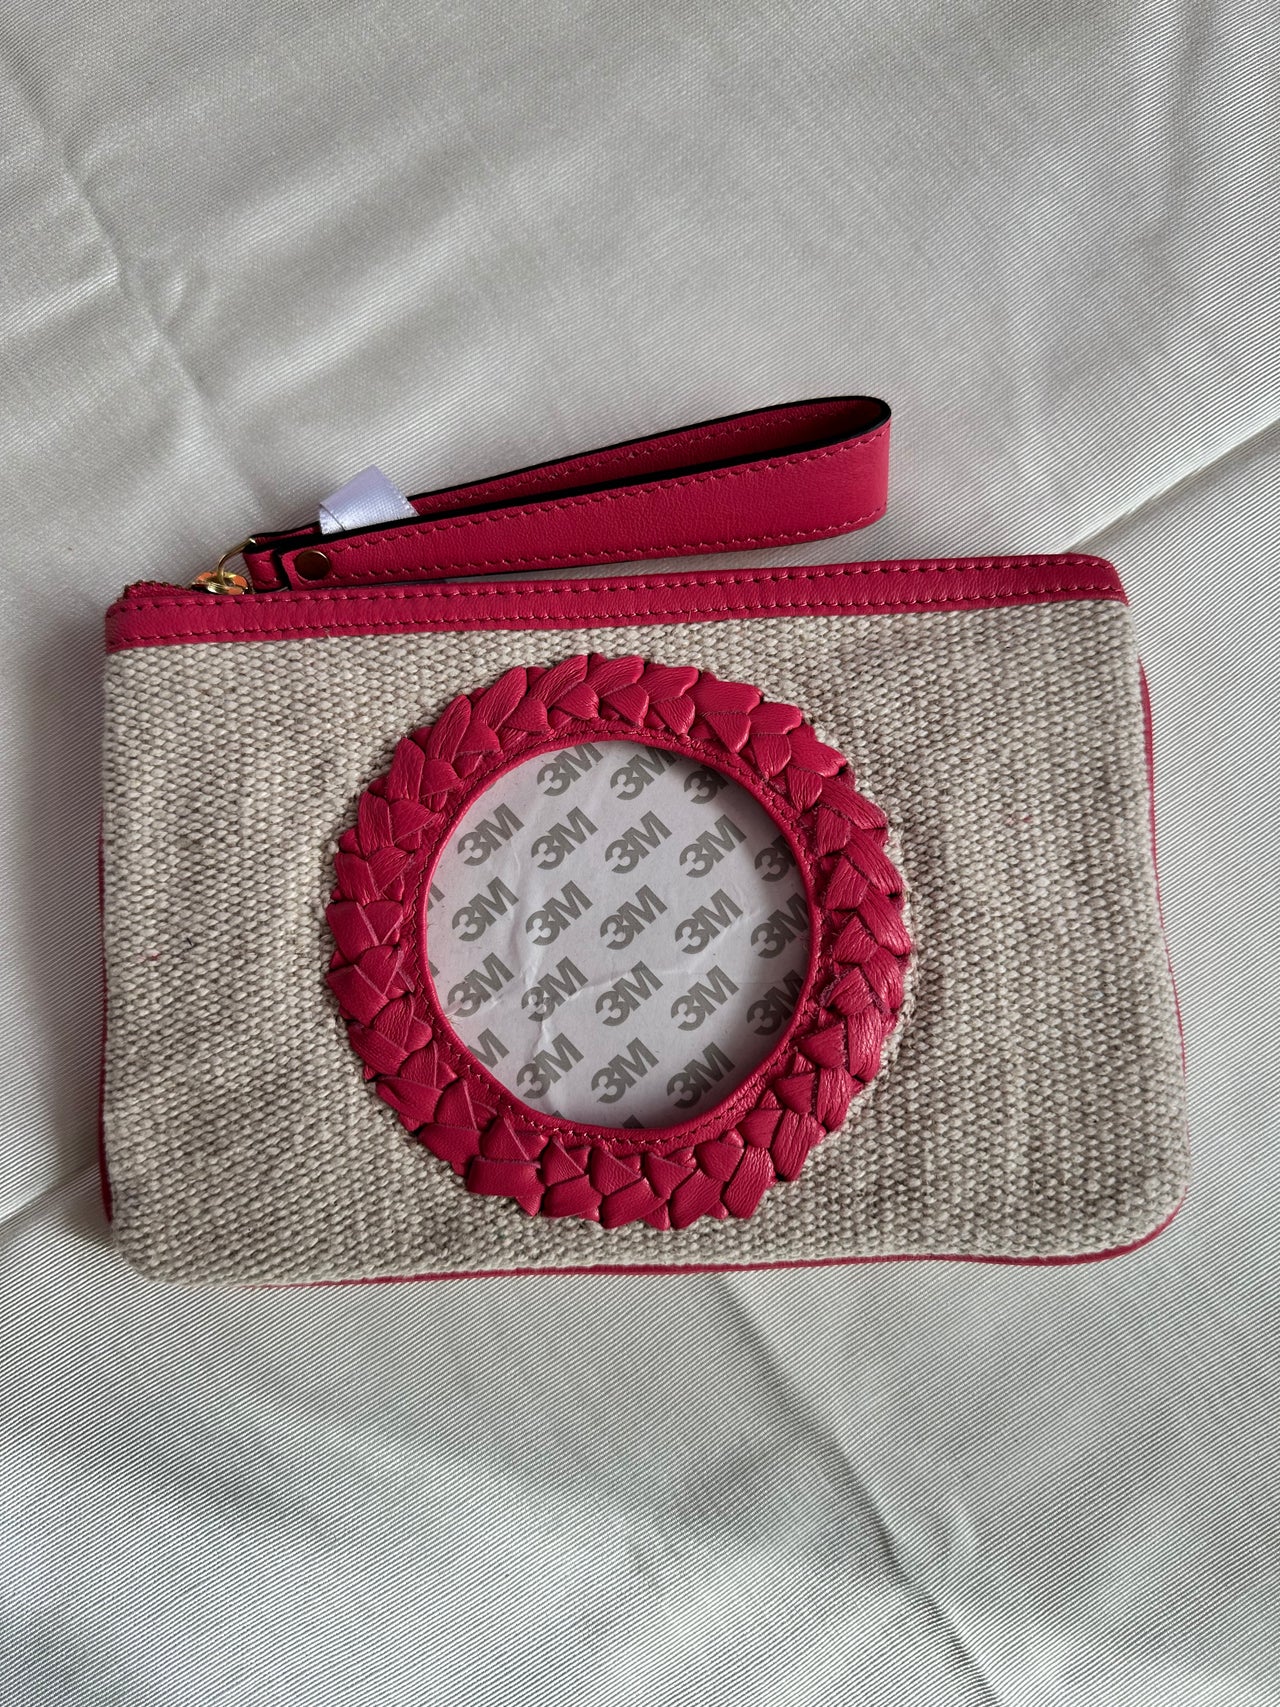 Canvas clutch / wristlet with leather trim, 3" Insert